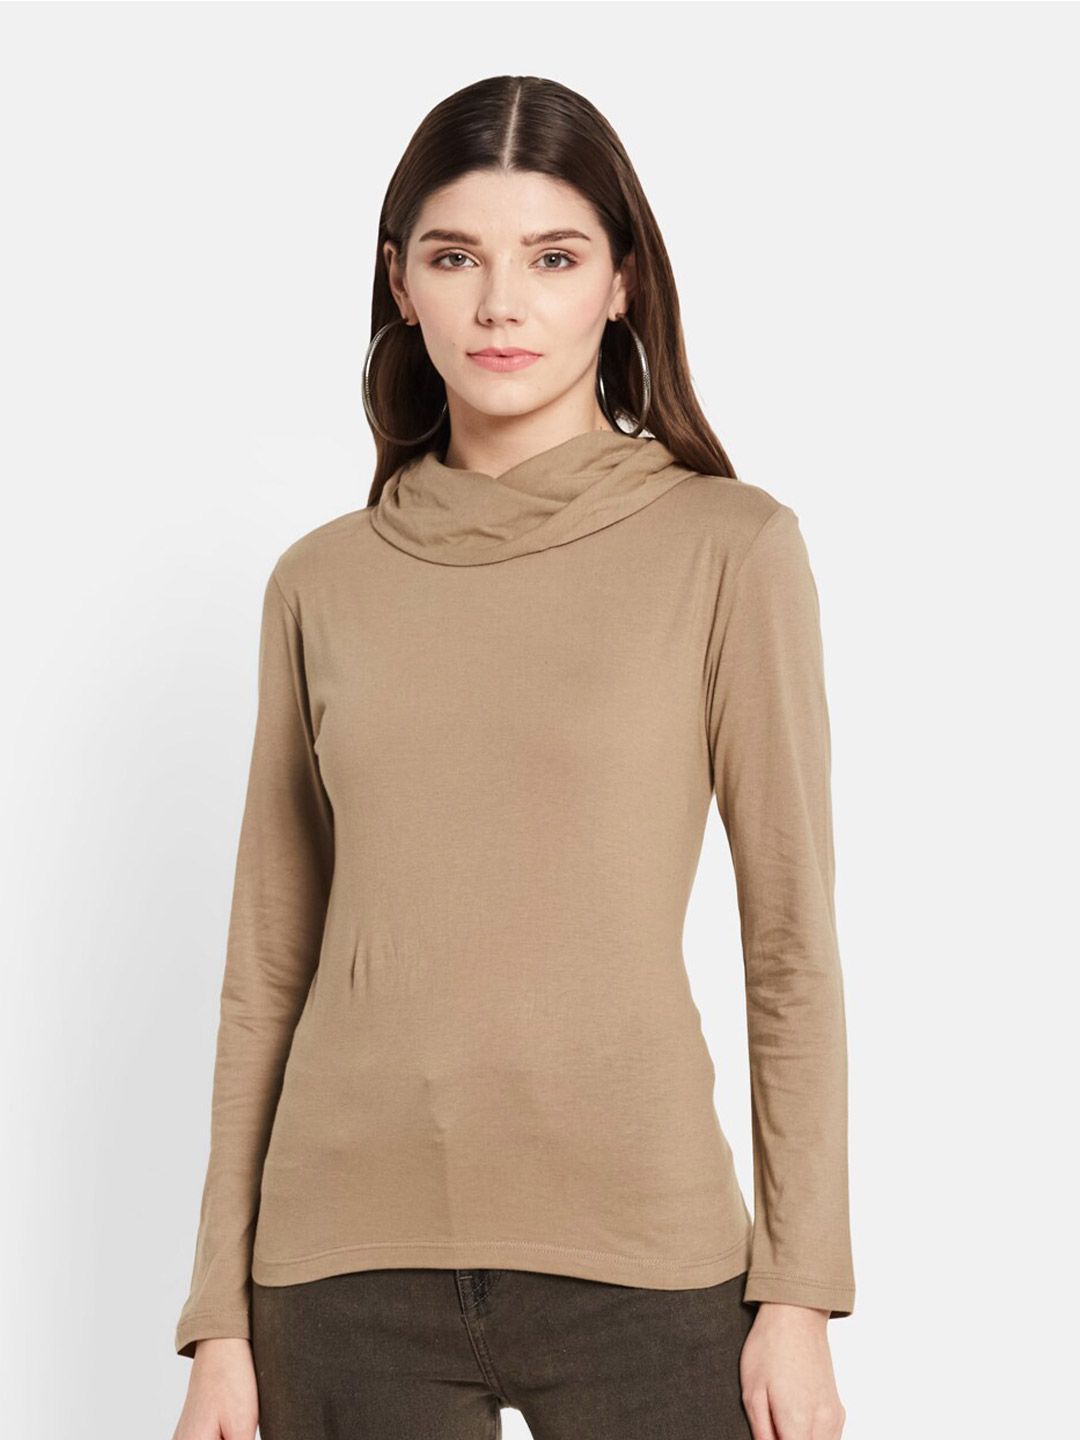 UNMADE Cowl Neck Long Sleeves Top Price in India